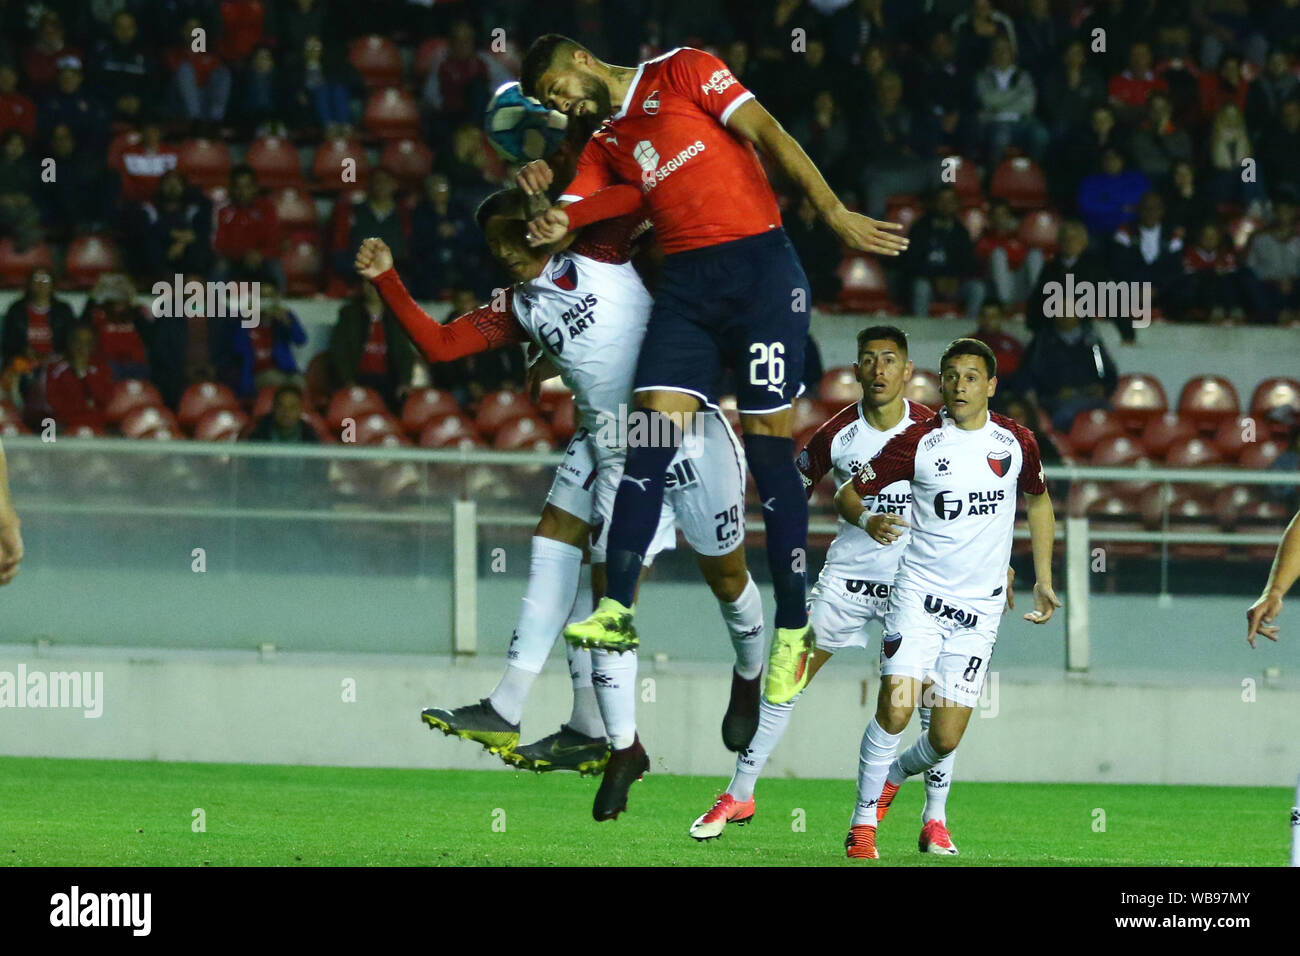 BUENOS AIRES, 24.08.2019: Alexander Barboza during the match between Independiente and Colón Santa Fé for match of Superliga Argentina on Libertadores Stock Photo